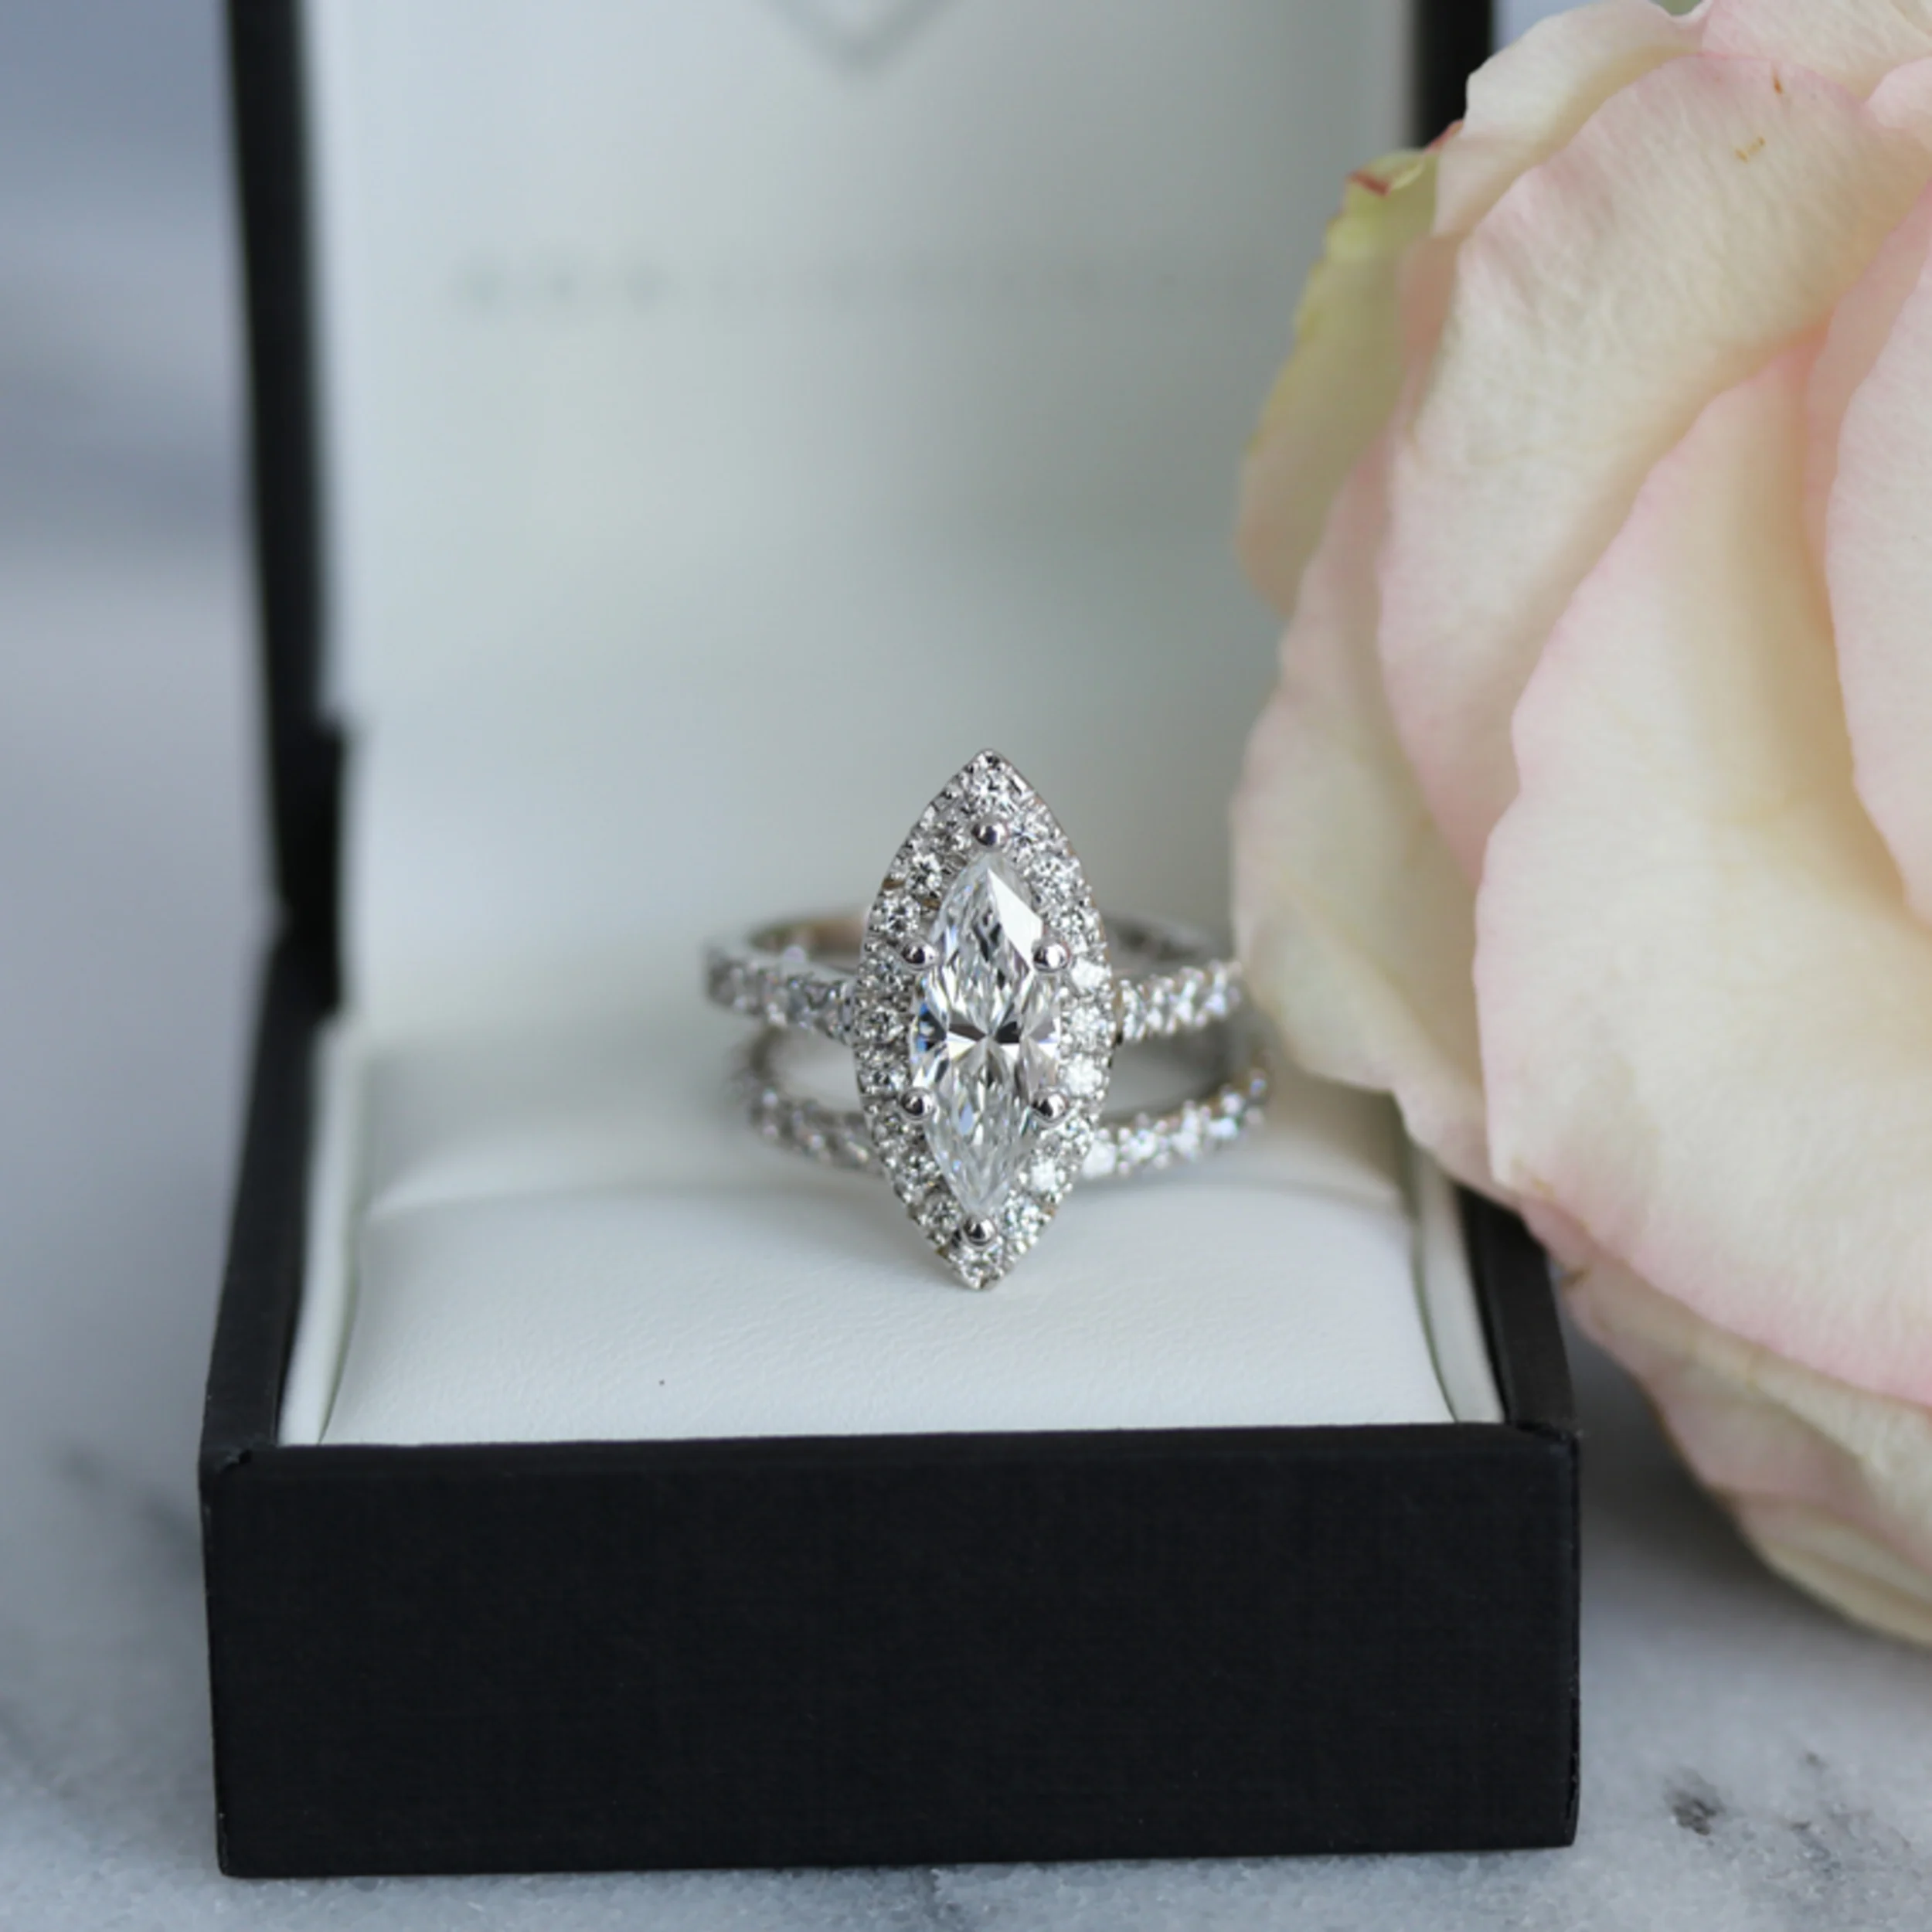 Fancy Halo Pave Top of the World Lab Created Diamond Engagement Ring Proposal Design-156